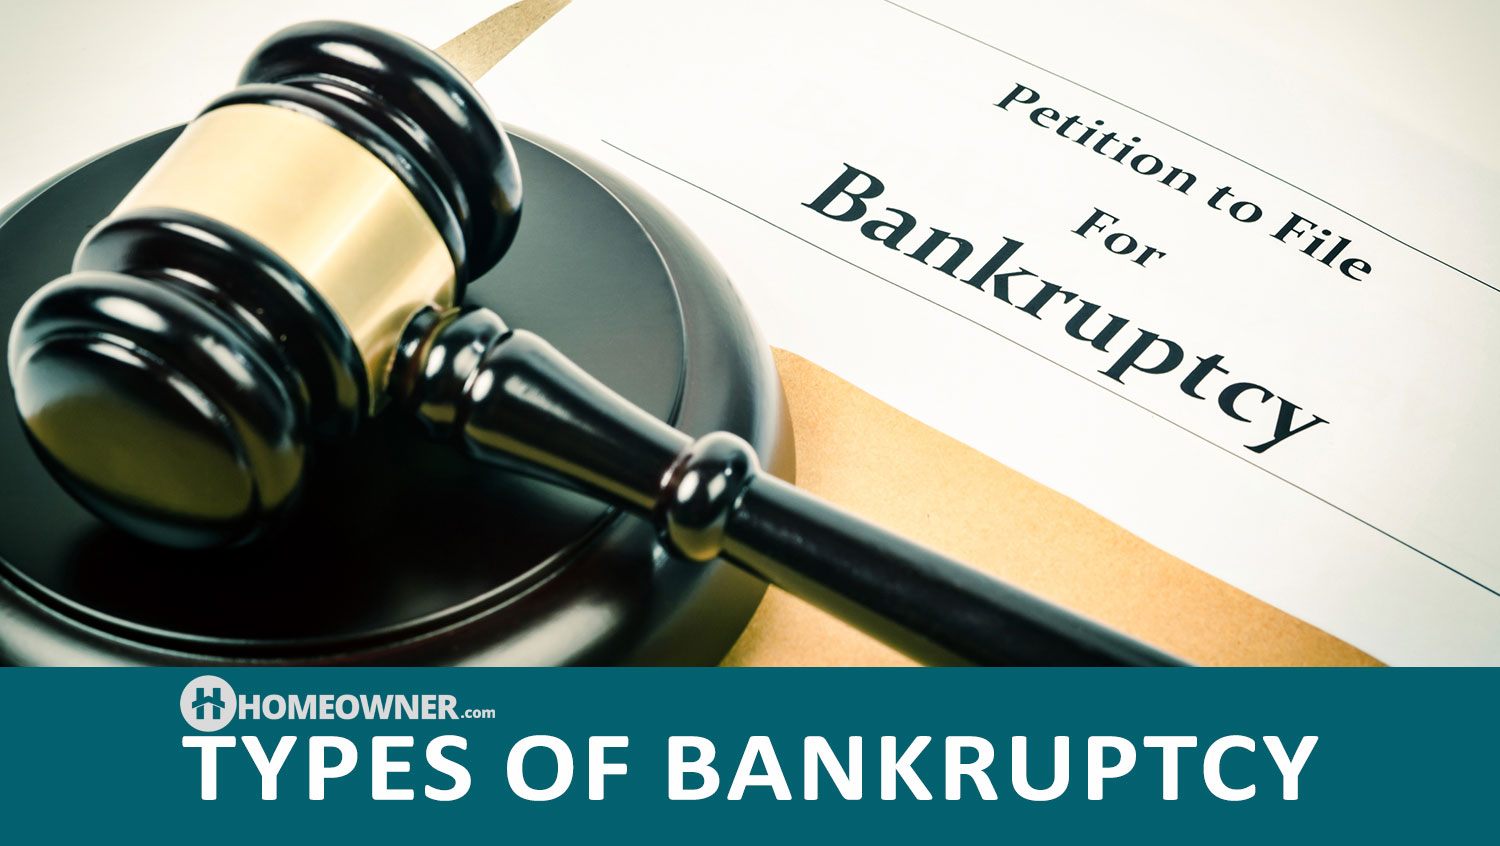 What Are the Different Types of Bankruptcy?